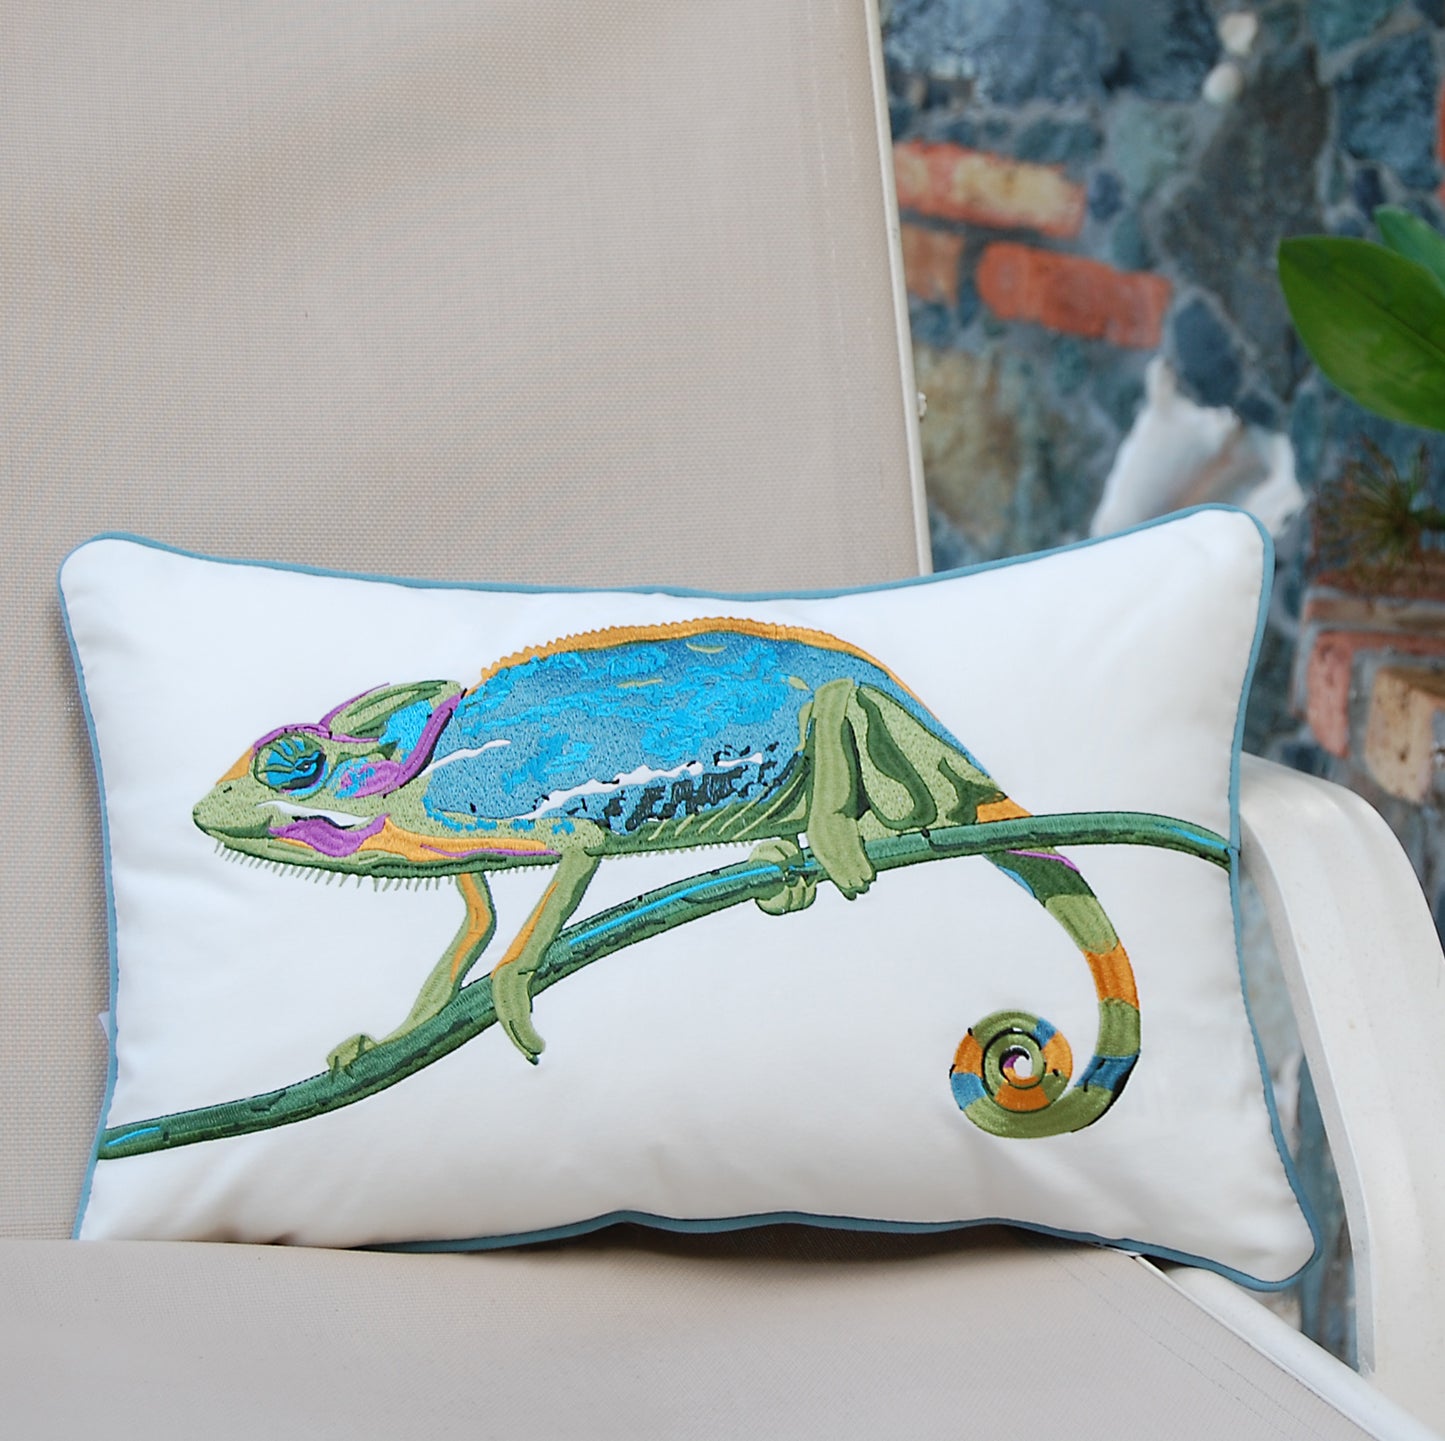 Chameleon pillow styled on an outdoor patio chair.